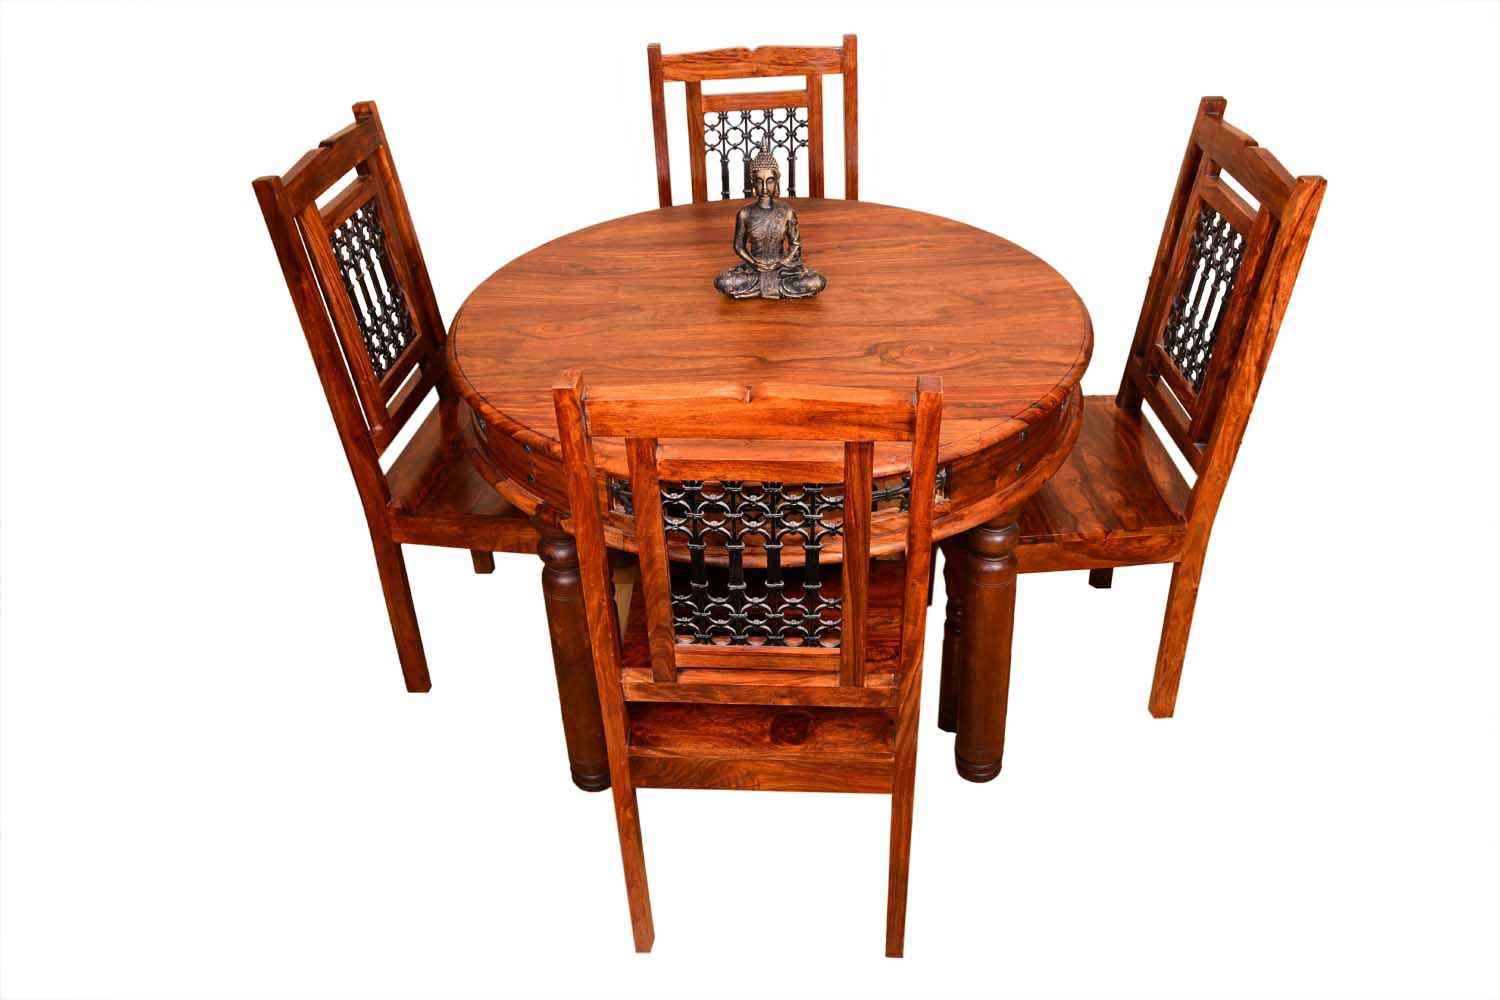 Houzz Dining Room Table 4 Chairs 279.99